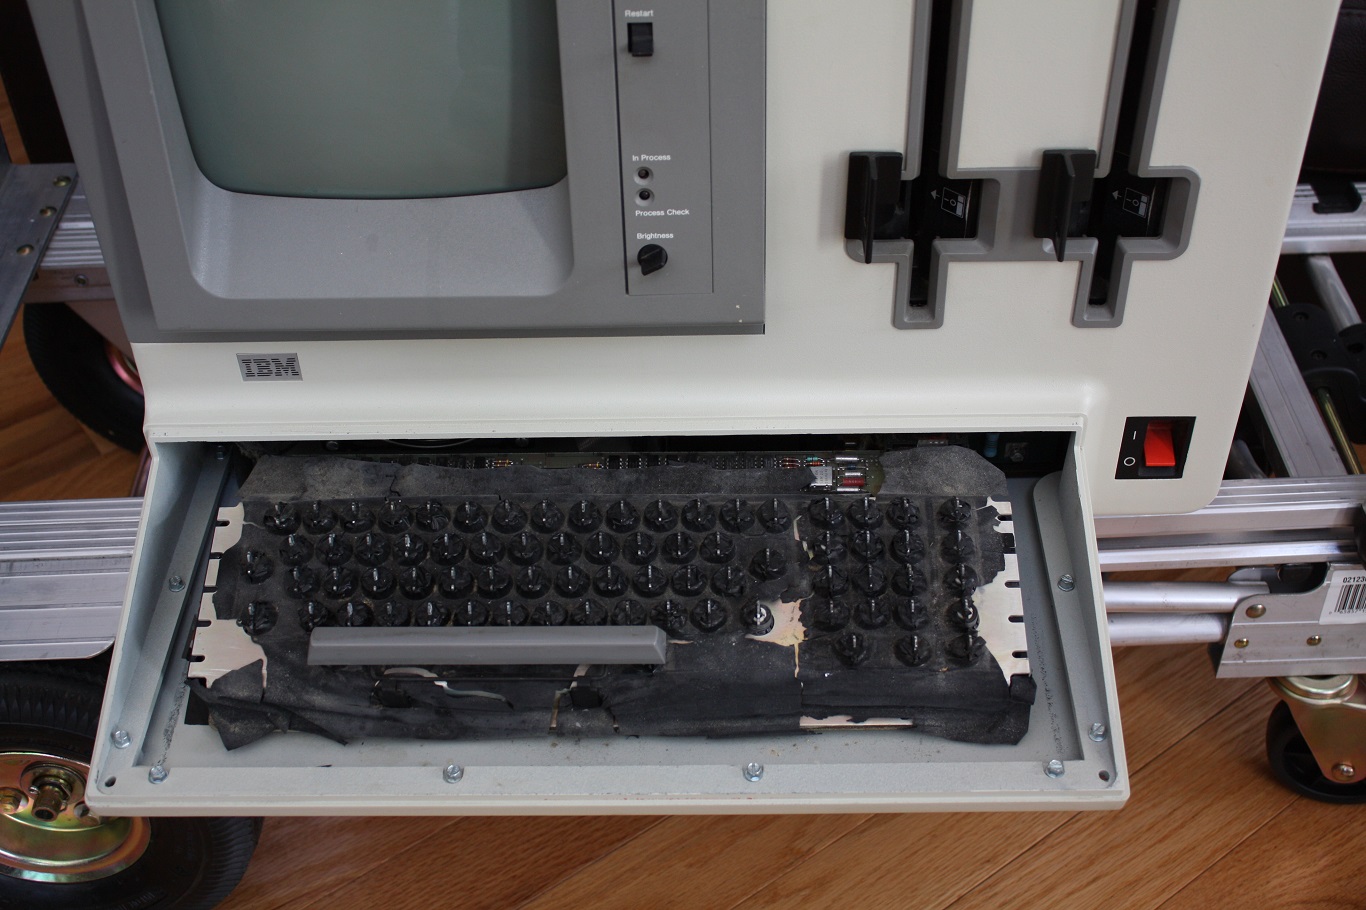 IBM 5120 - keyboard membrane with caps removed